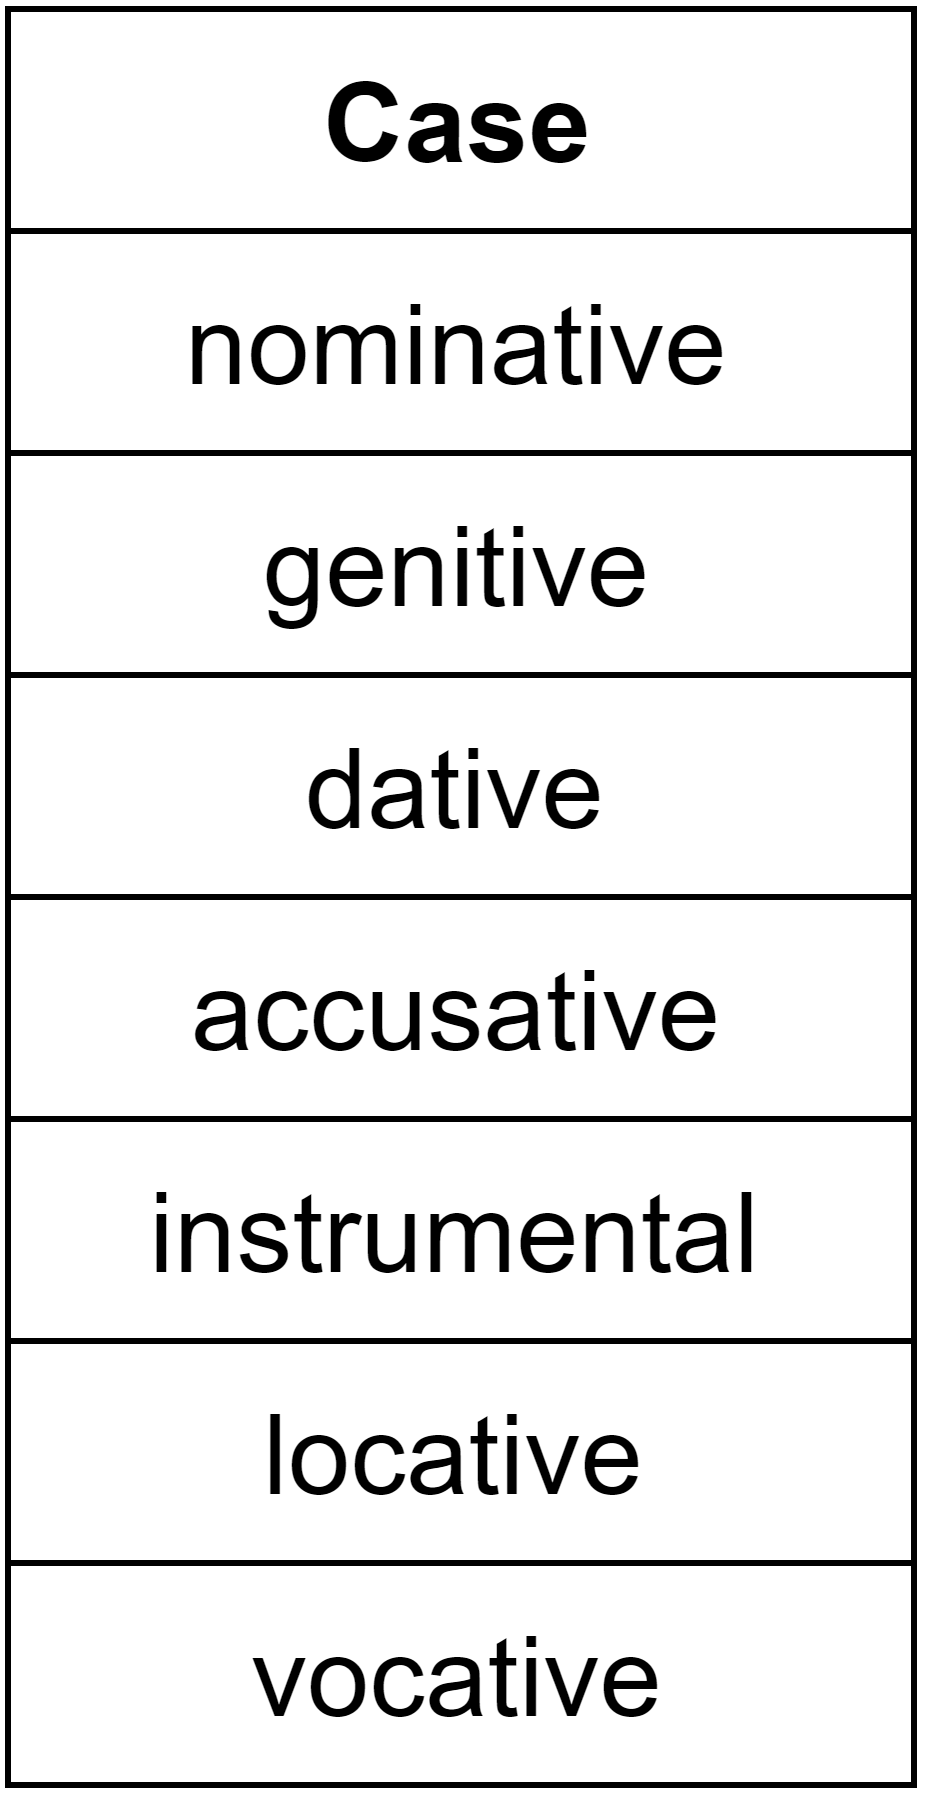 Grammtical case in Polish adjectives